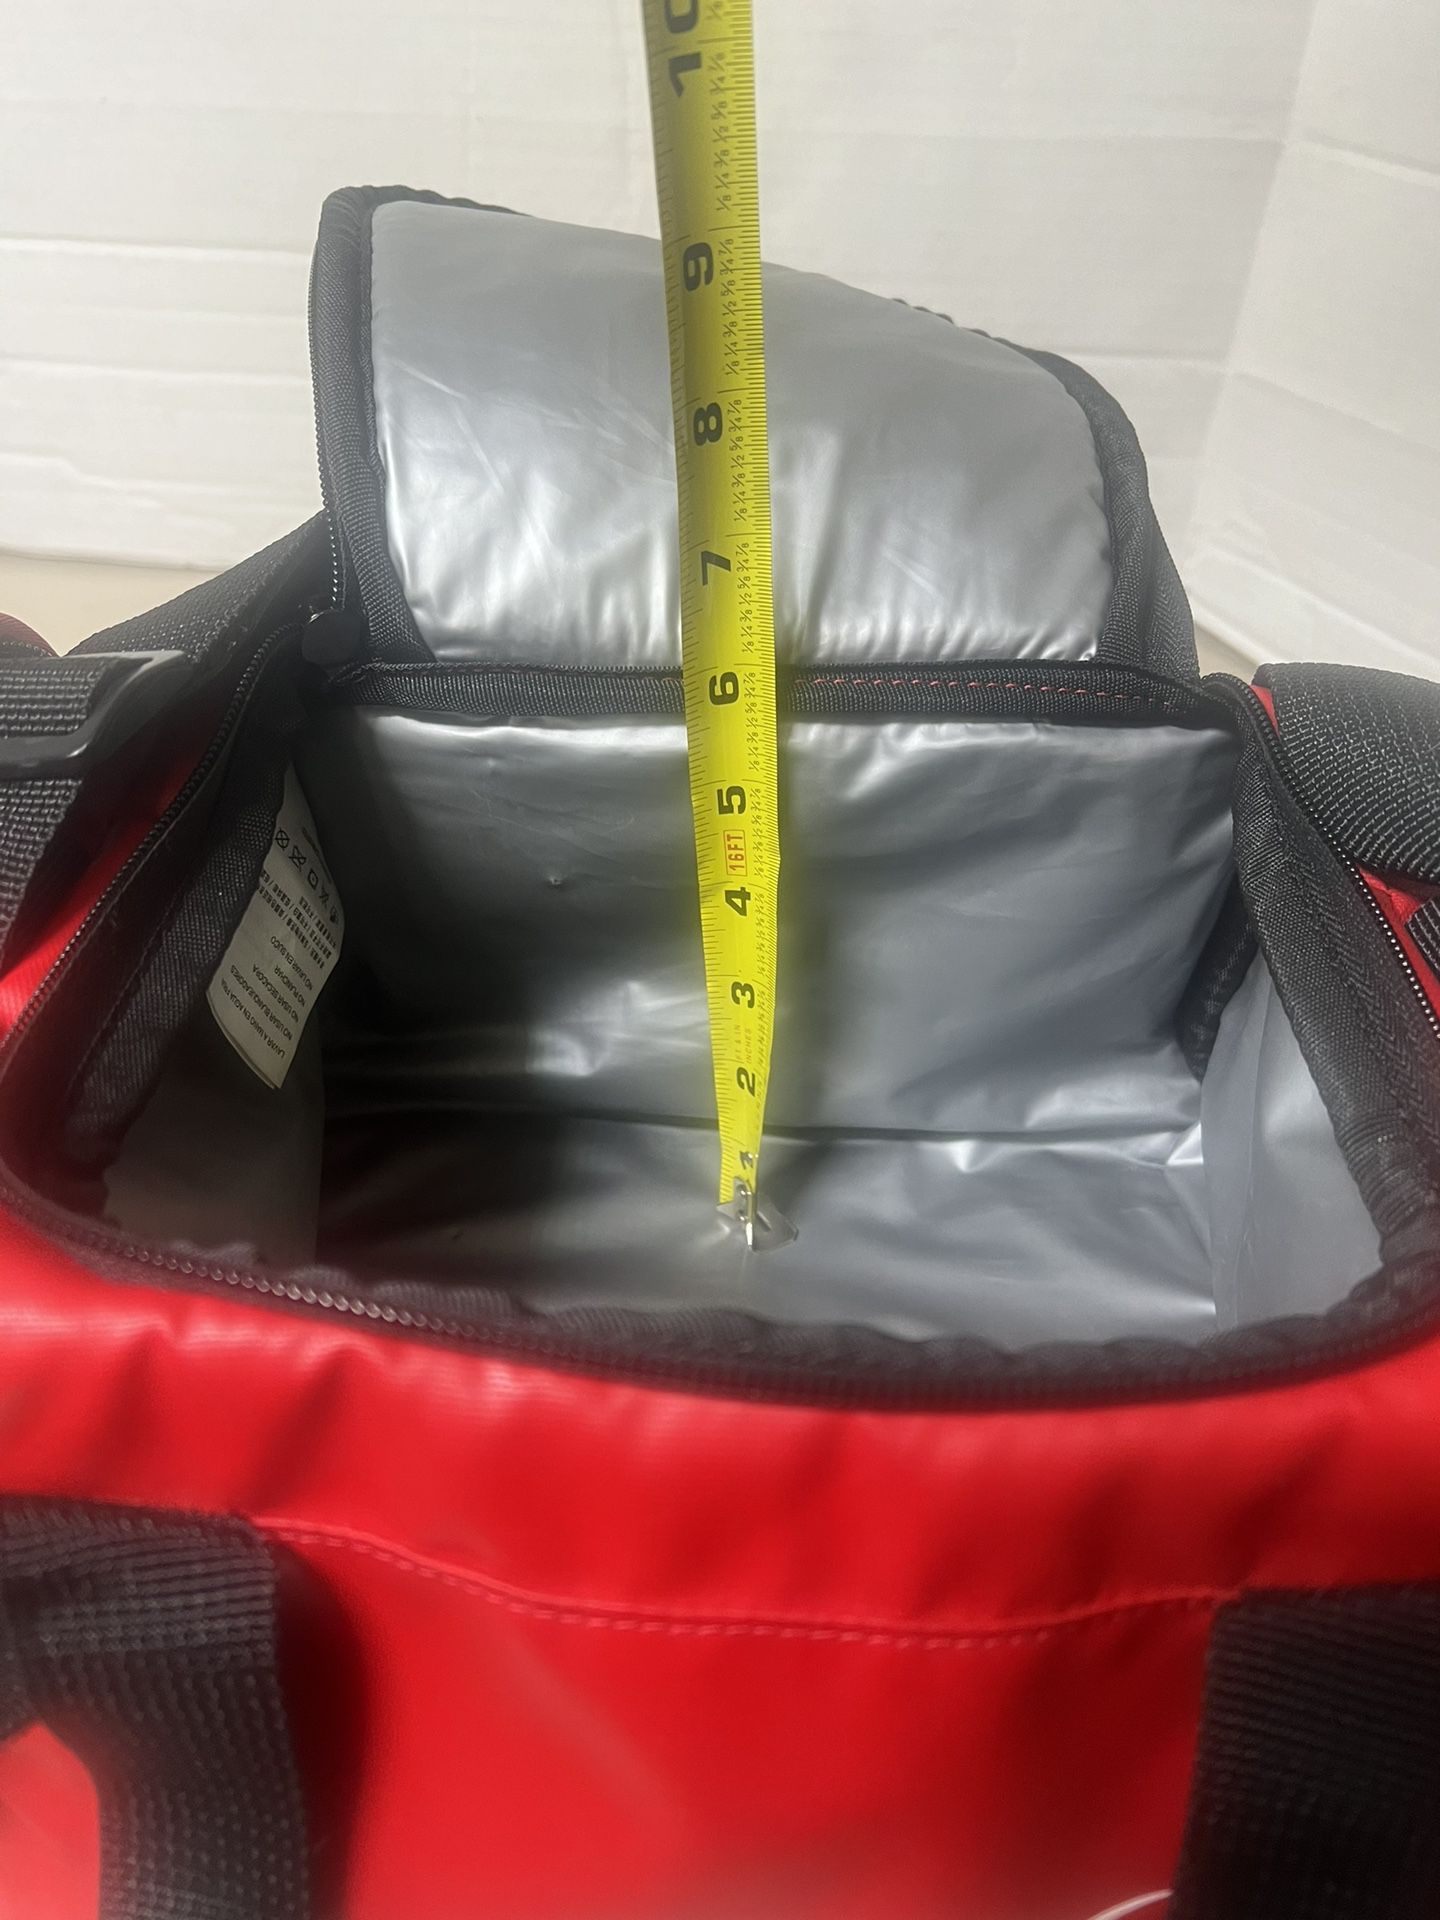 Nike Insulated cooler with pockets and Shoulder Straps Great Condition. Used in good condition with very minimal cosmetic blemishes with the major ble